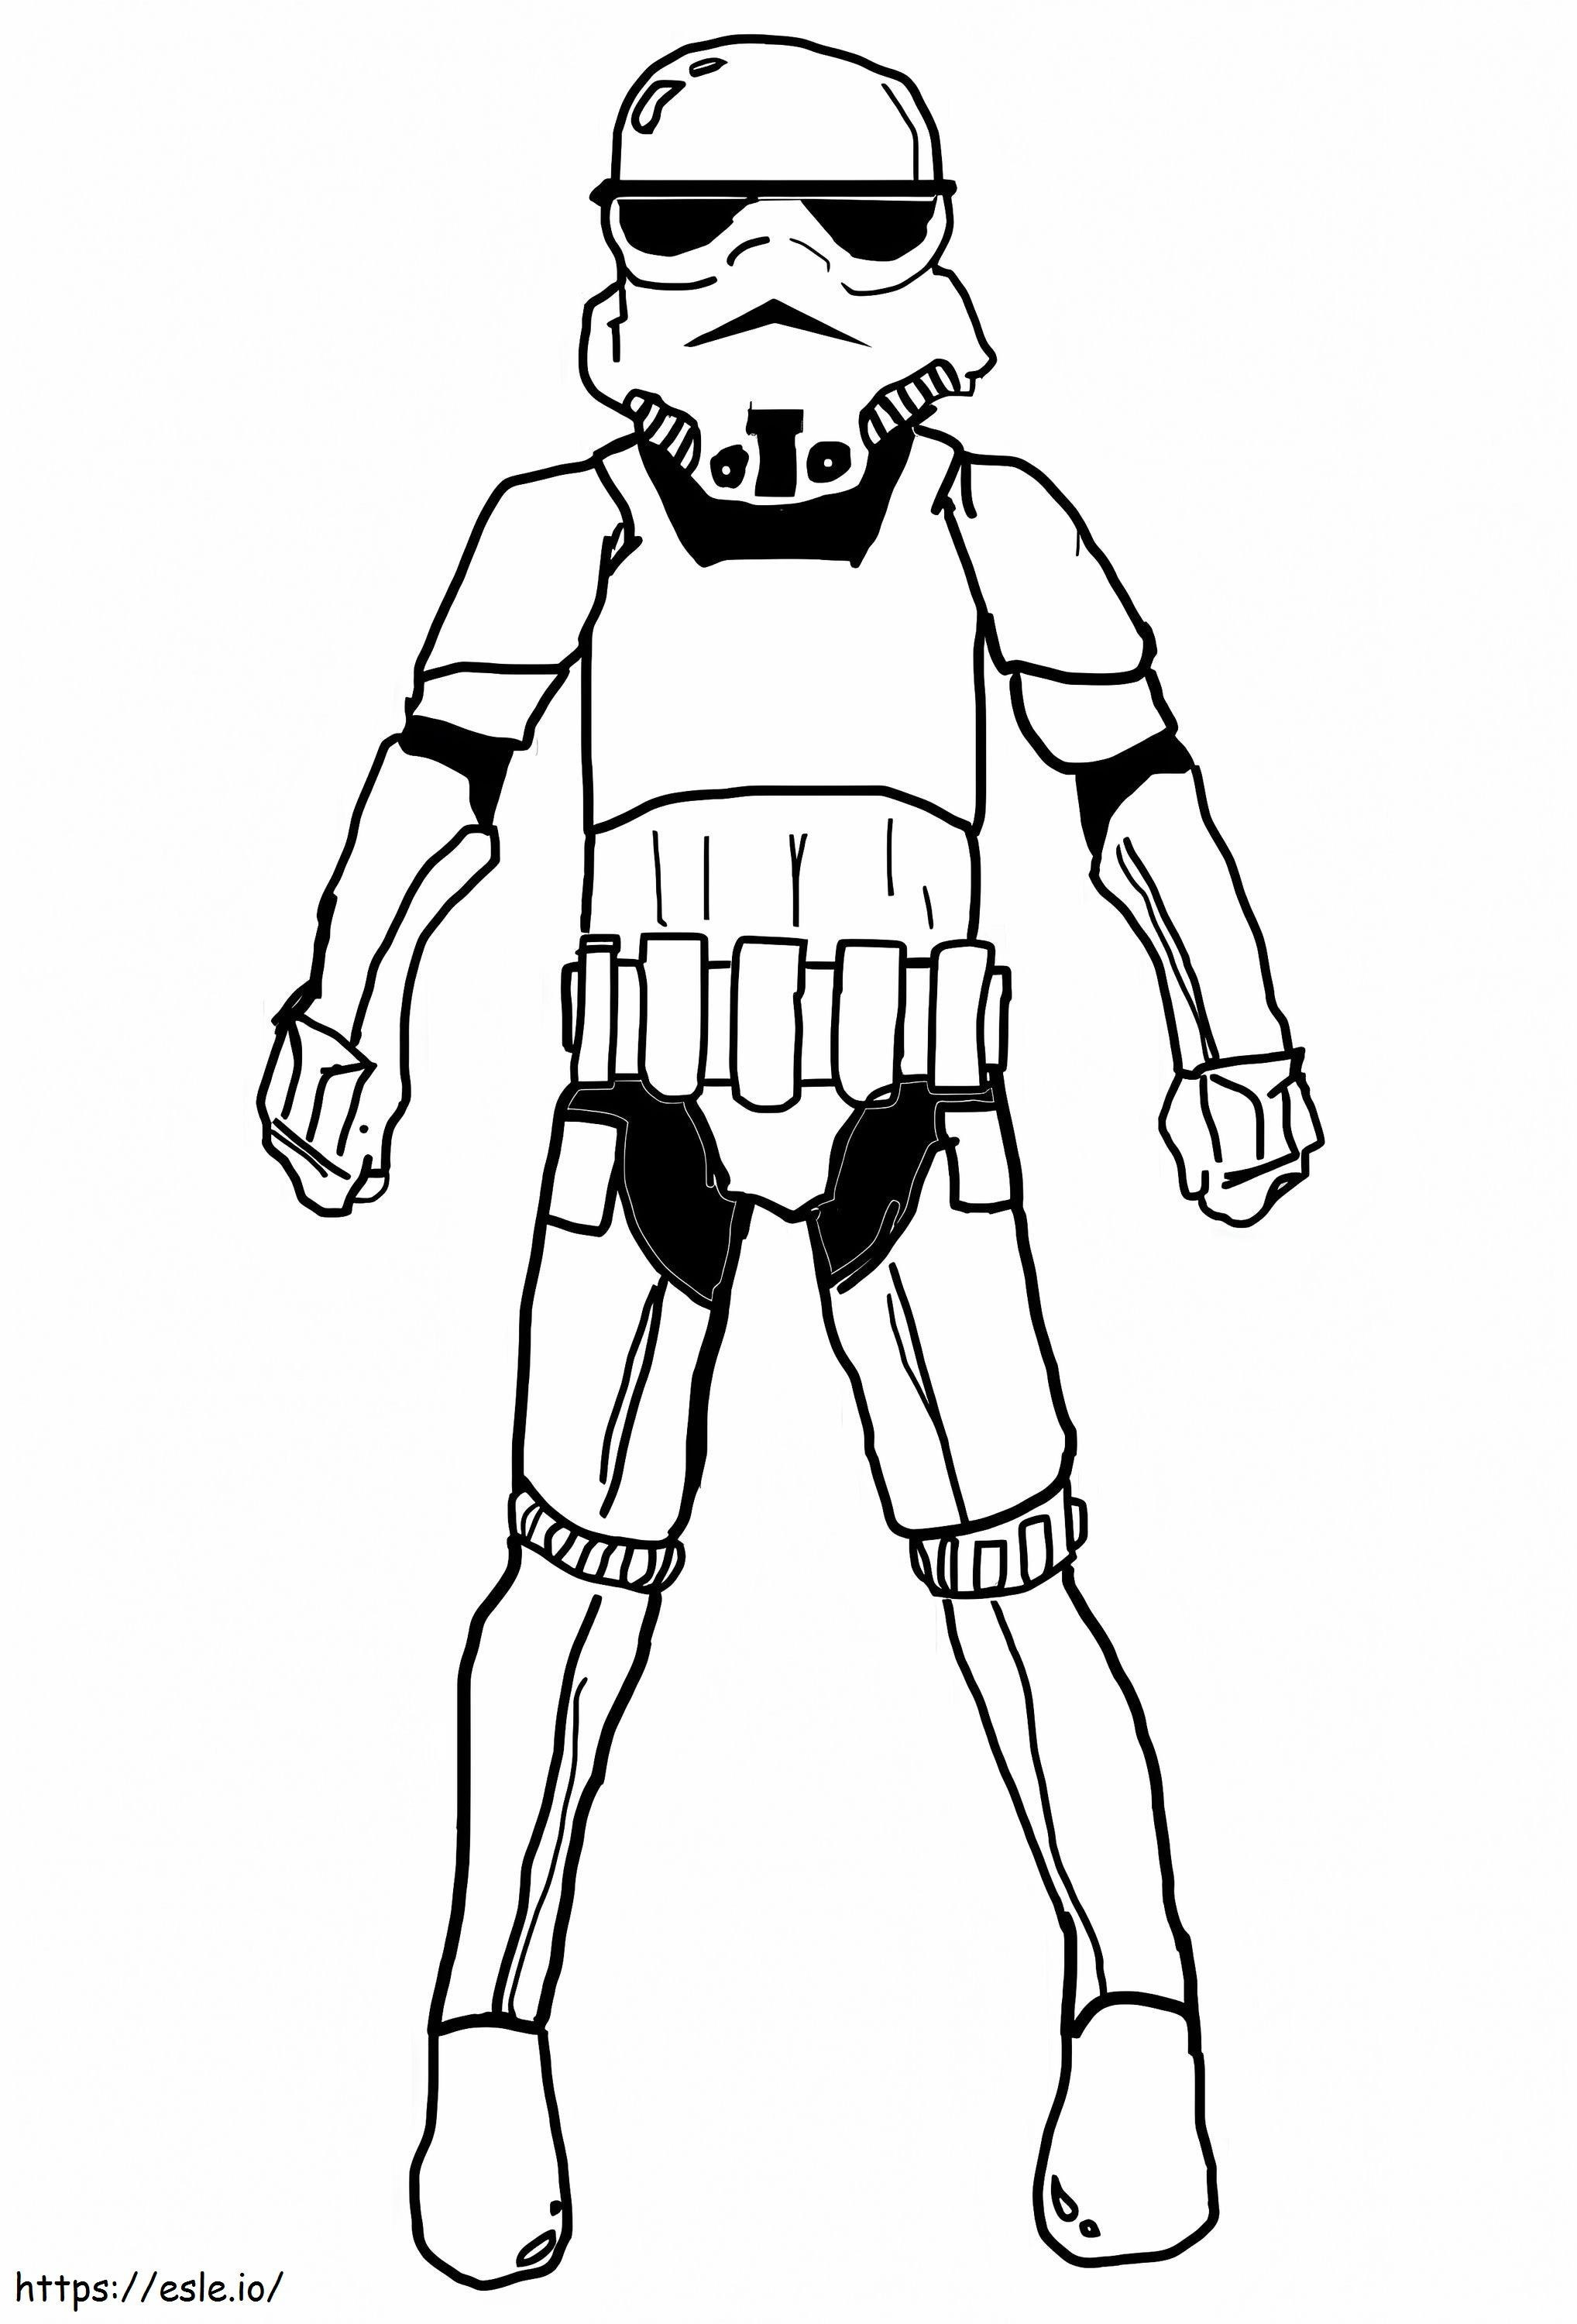 Stormtrooper 10 coloring page